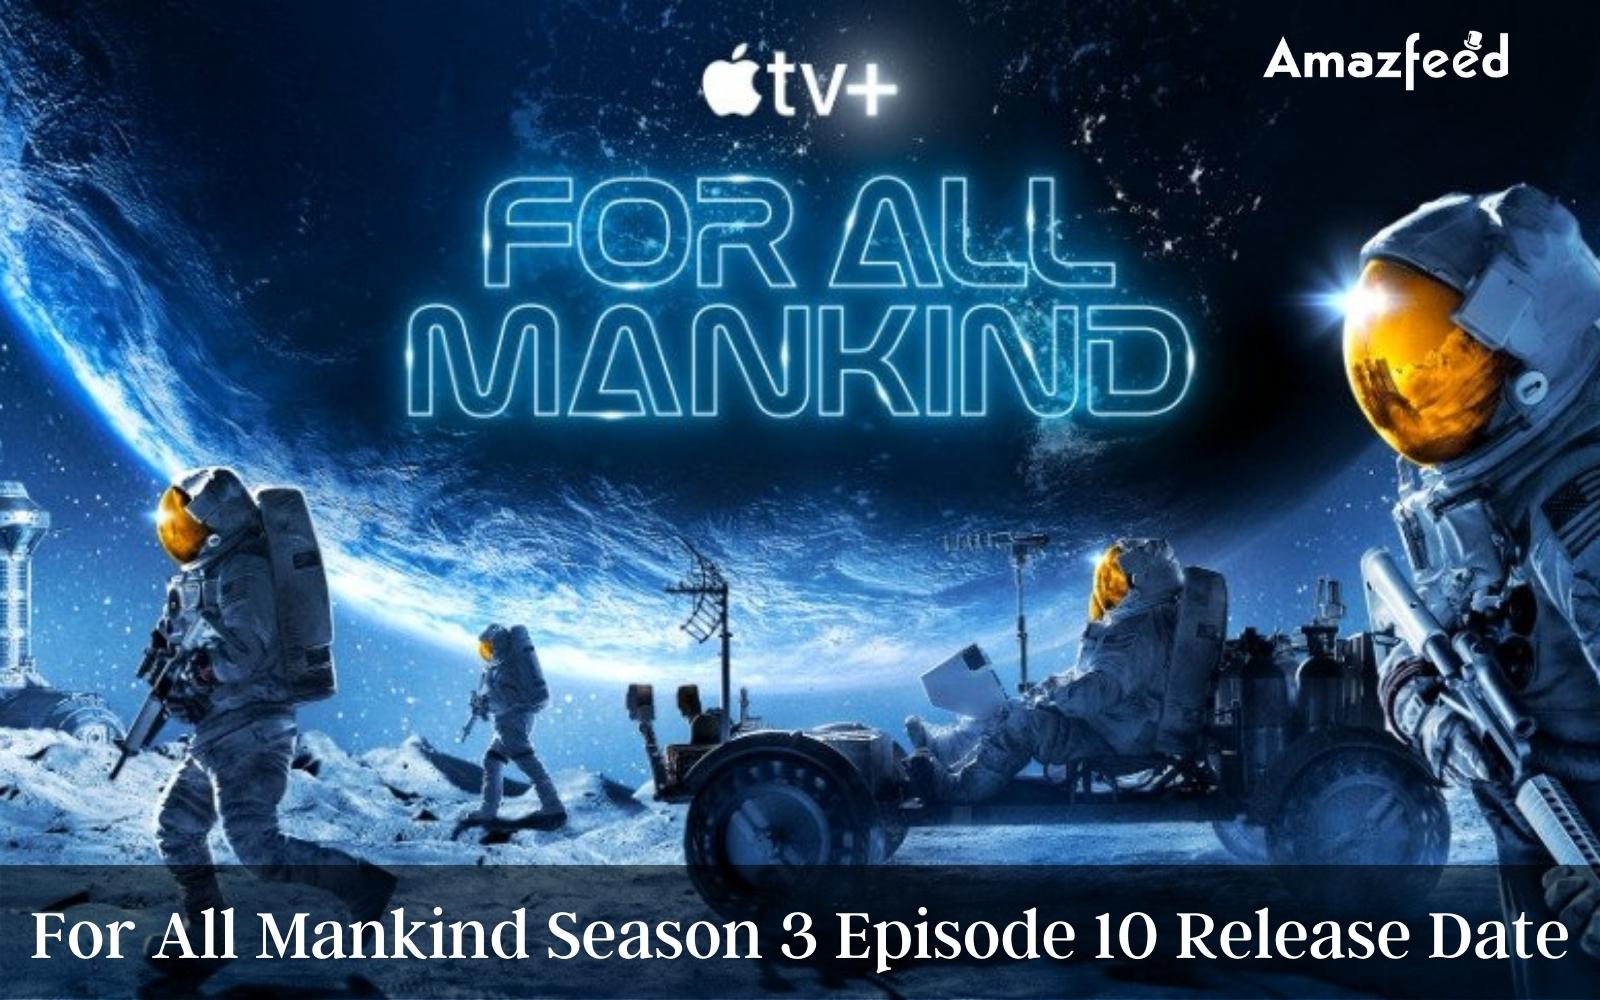 For All Mankind Season 3 Episode 10 ⇒ Countdown, Release Date, Spoilers, Recap, Cast & Where to Watch